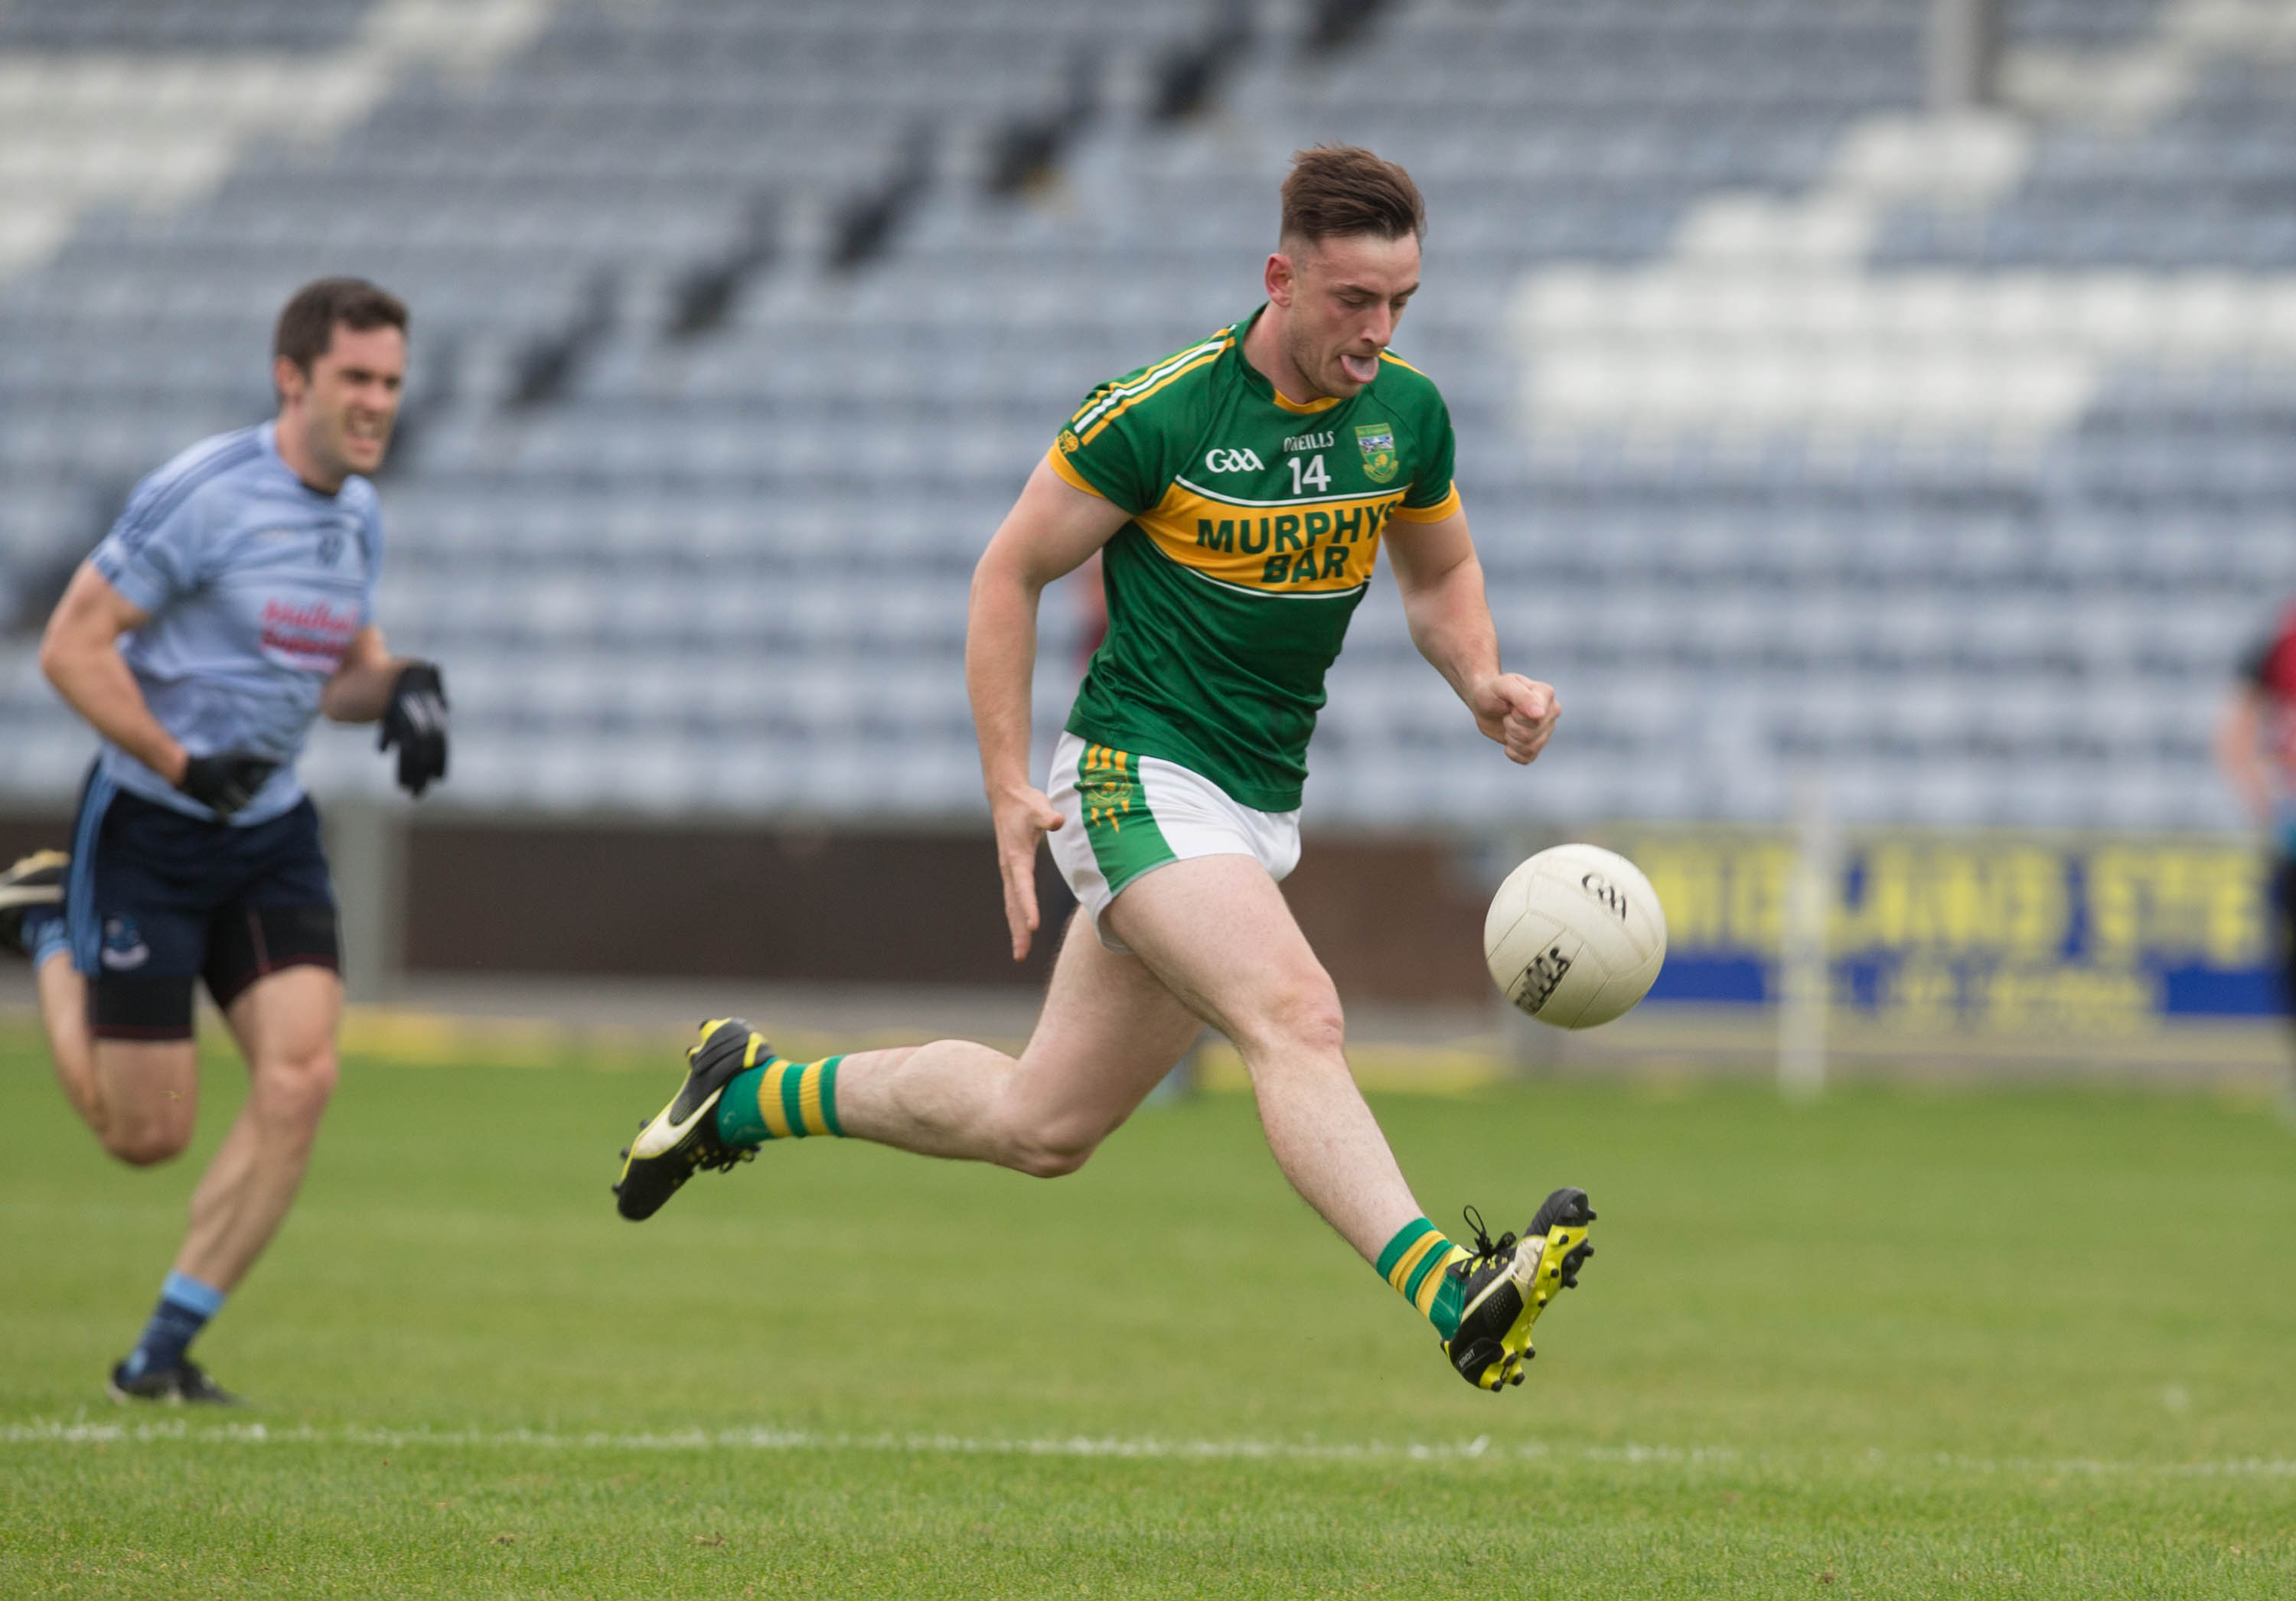 Ballylinan's Gary Walsh has suffered a cruciate knee injury and will miss tonight's game against Portarlington